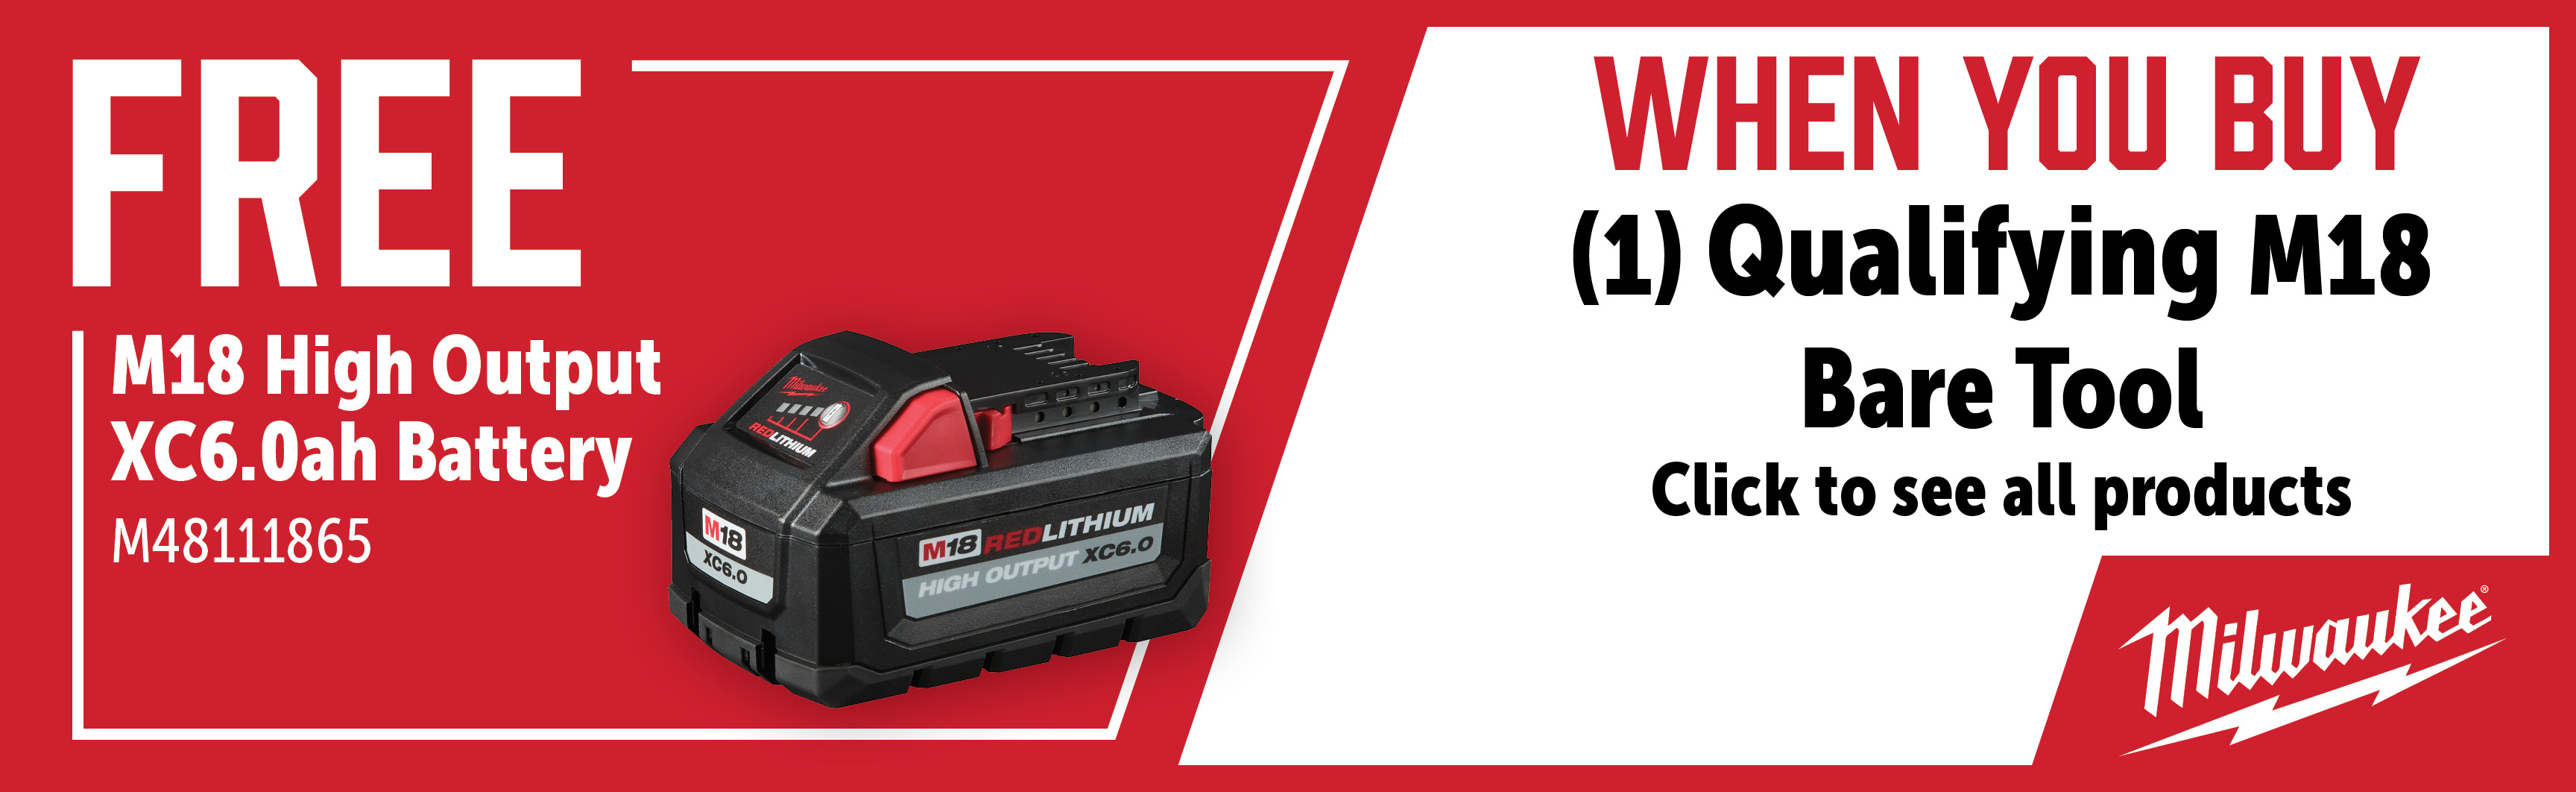 Milwaukee Feb-Apr: Buy a Qualifying M18 Fuel Bare Tool and Get a FREE M48111865